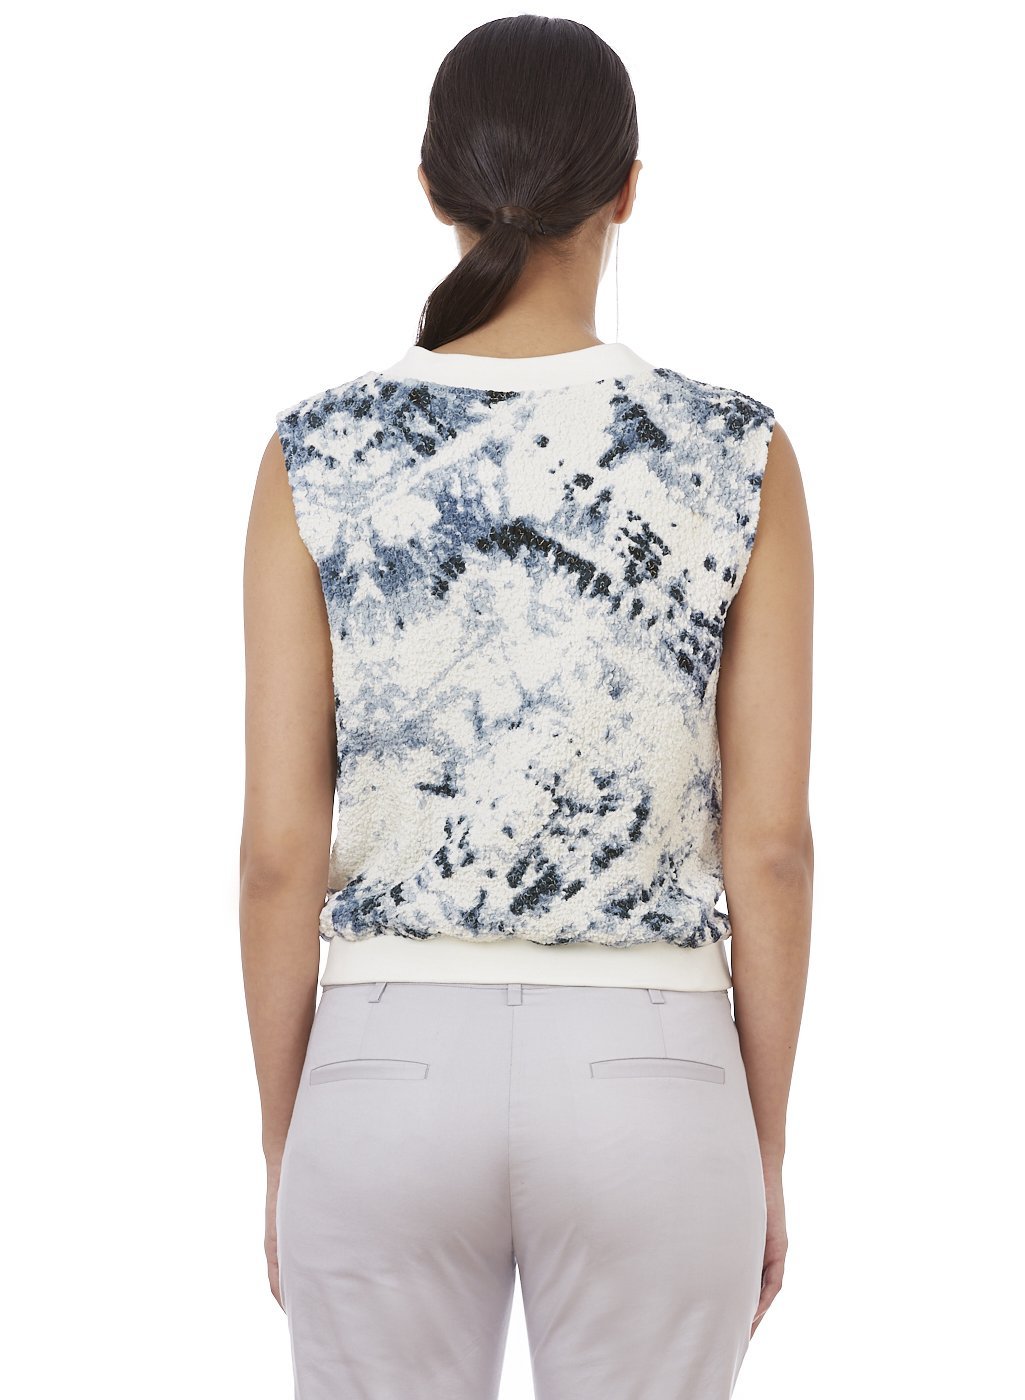 LAYLA TIE AND DYE LAYERED TOP - Genes online store 2020